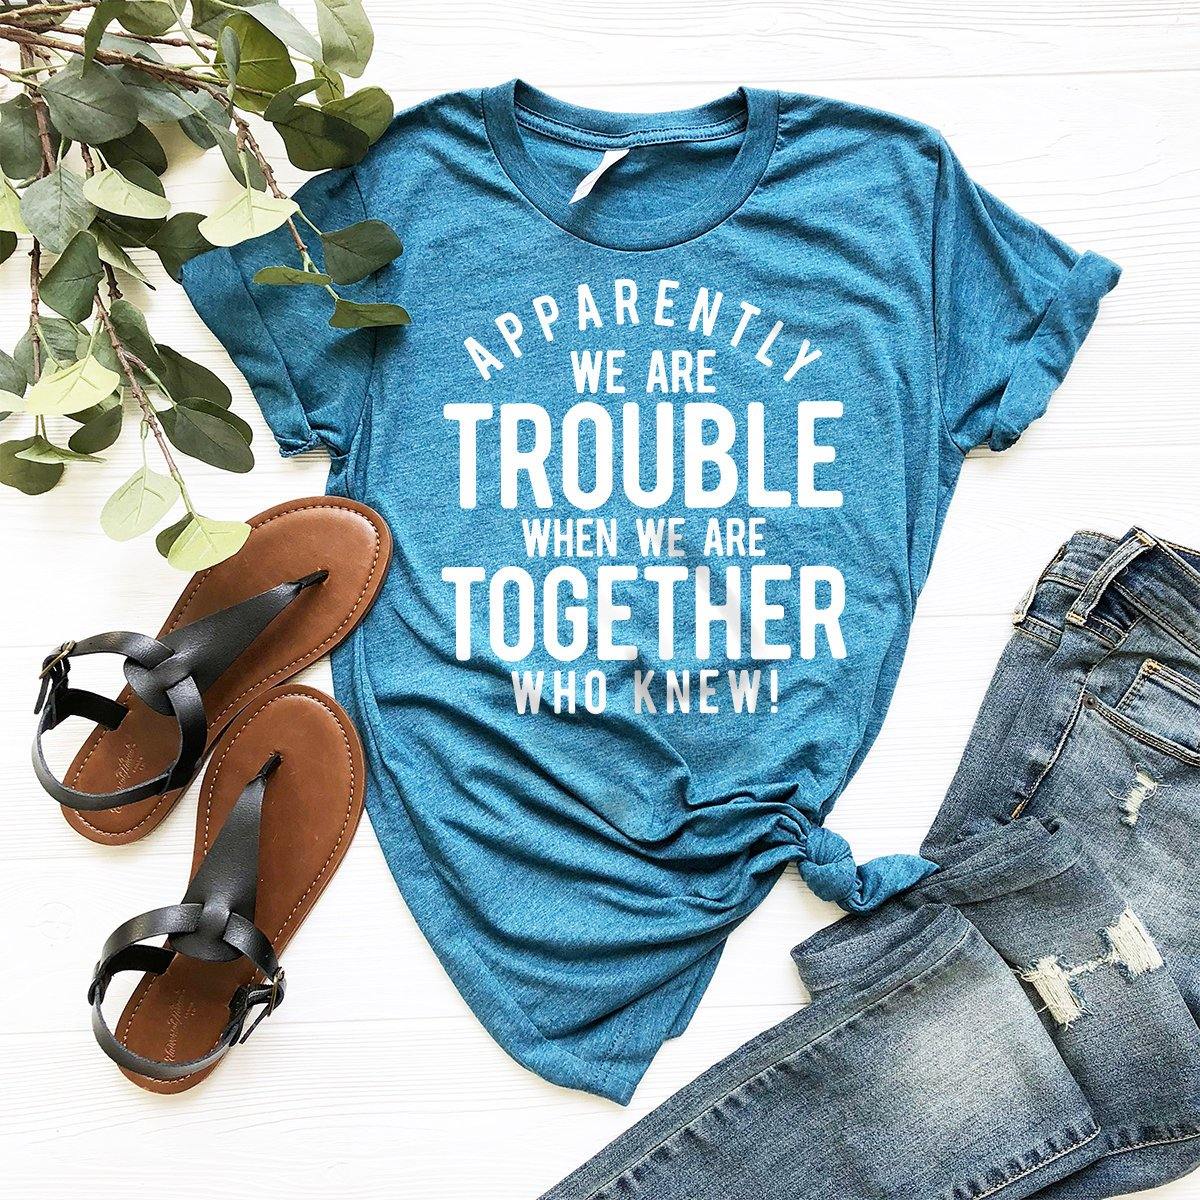 Bestie T-Shirt, Best Friend Gift, Bff Shirts, BFF Birthday Gift, Apparently We Are Trouble When We Are Together Who Knew  Shirt - Fastdeliverytees.com